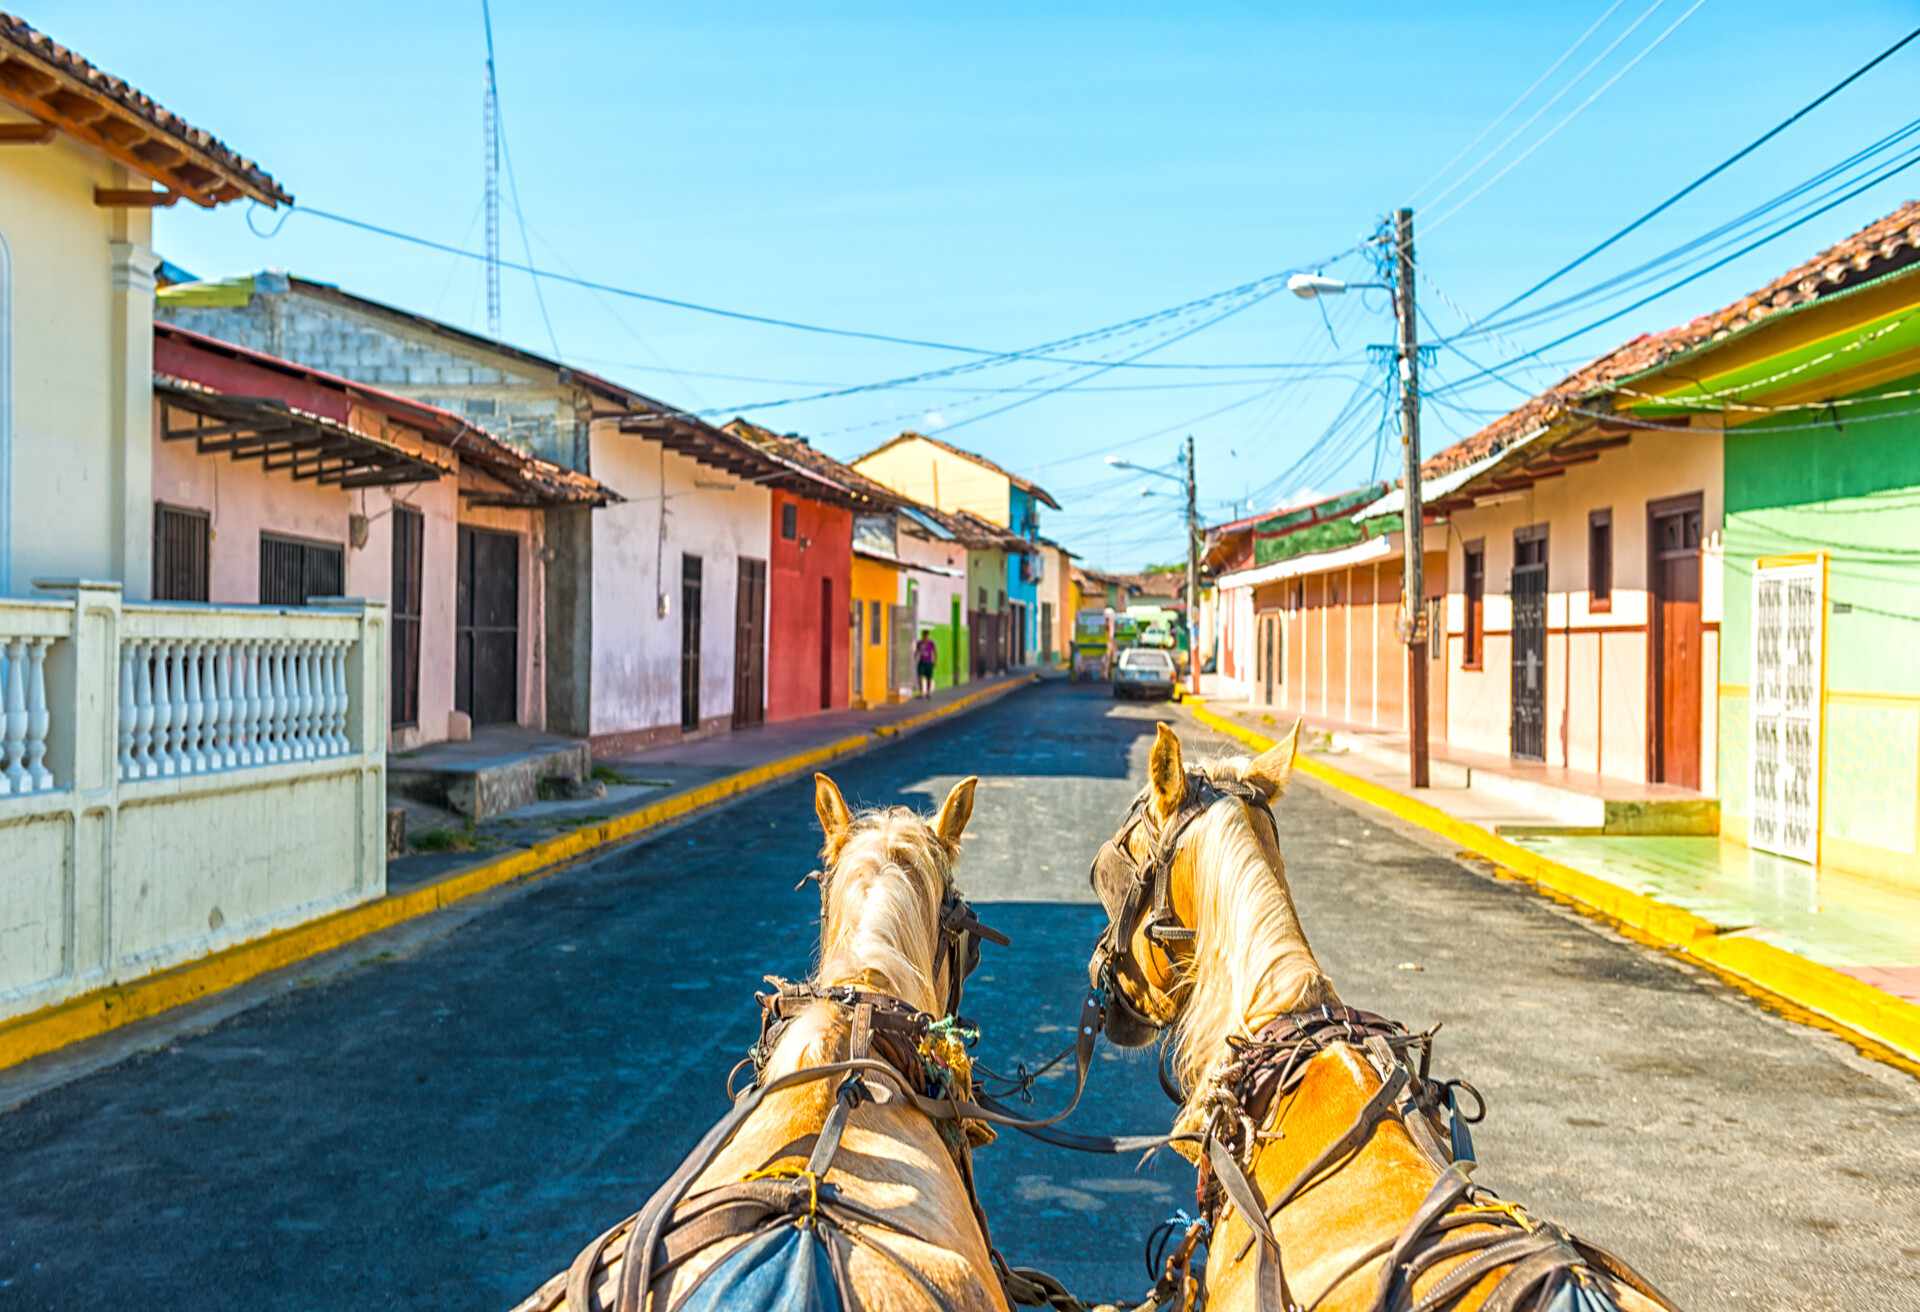 Site seeing by horse carriage the old city Granada in Nicaragua. Colorful facades against blue sky.